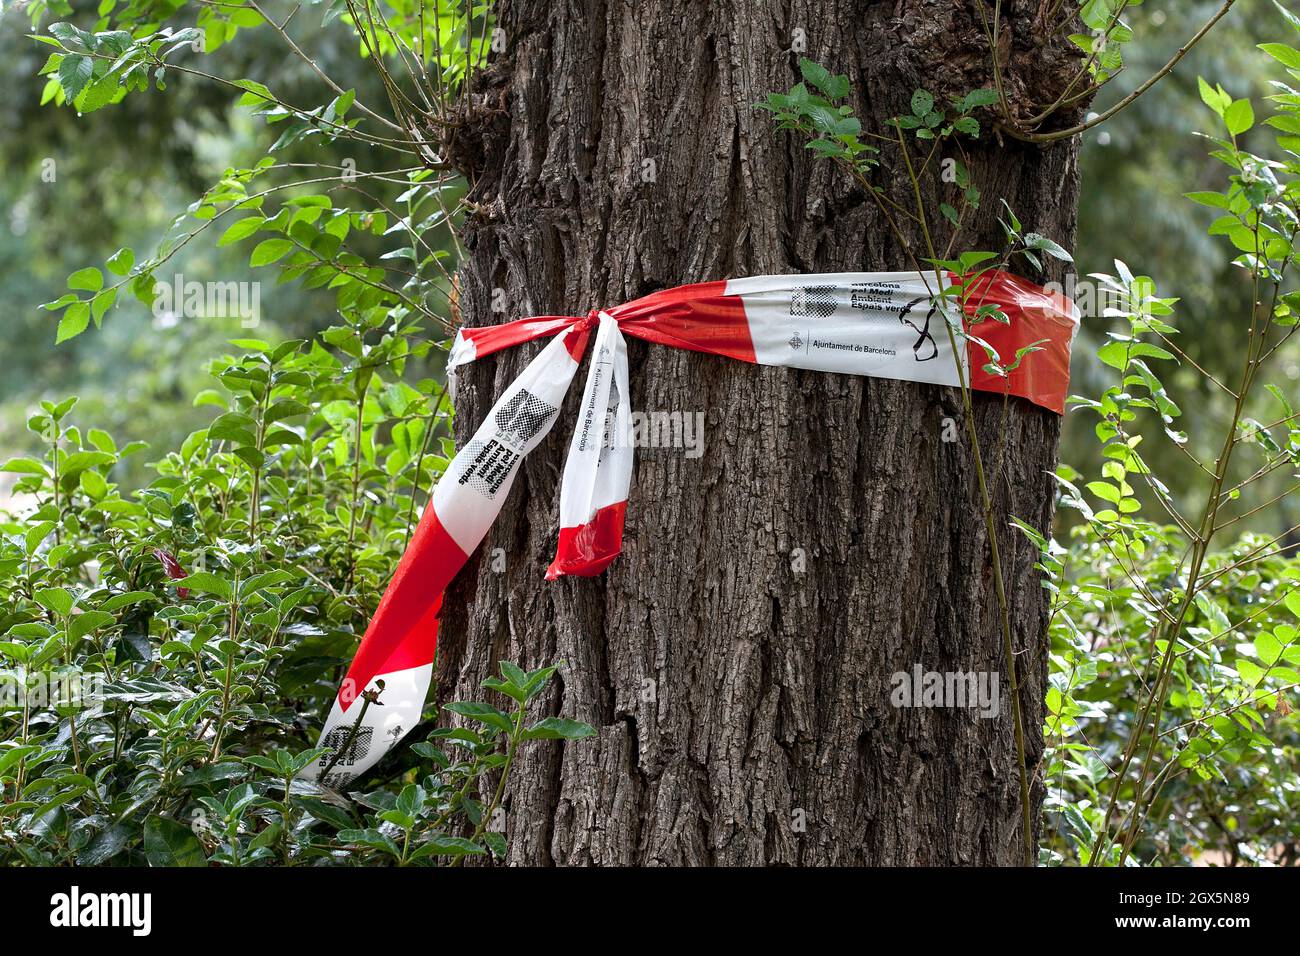 The remains of tape used to warn people that the park was off limits during the pandemic, Barcelona, Spain. Stock Photo